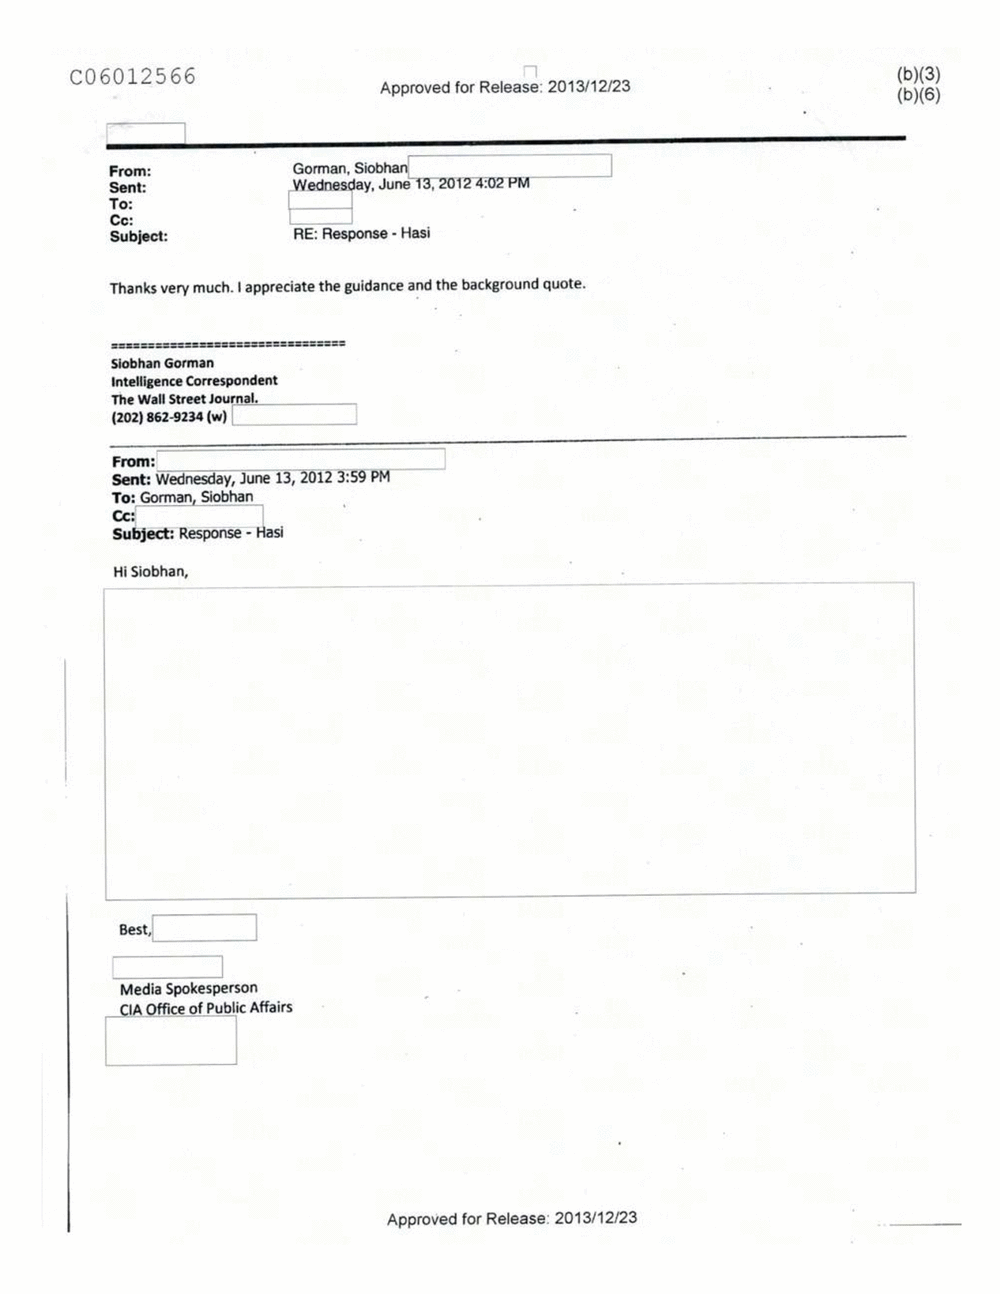 Page 97 from Email Correspondence Between Reporters and CIA Flacks